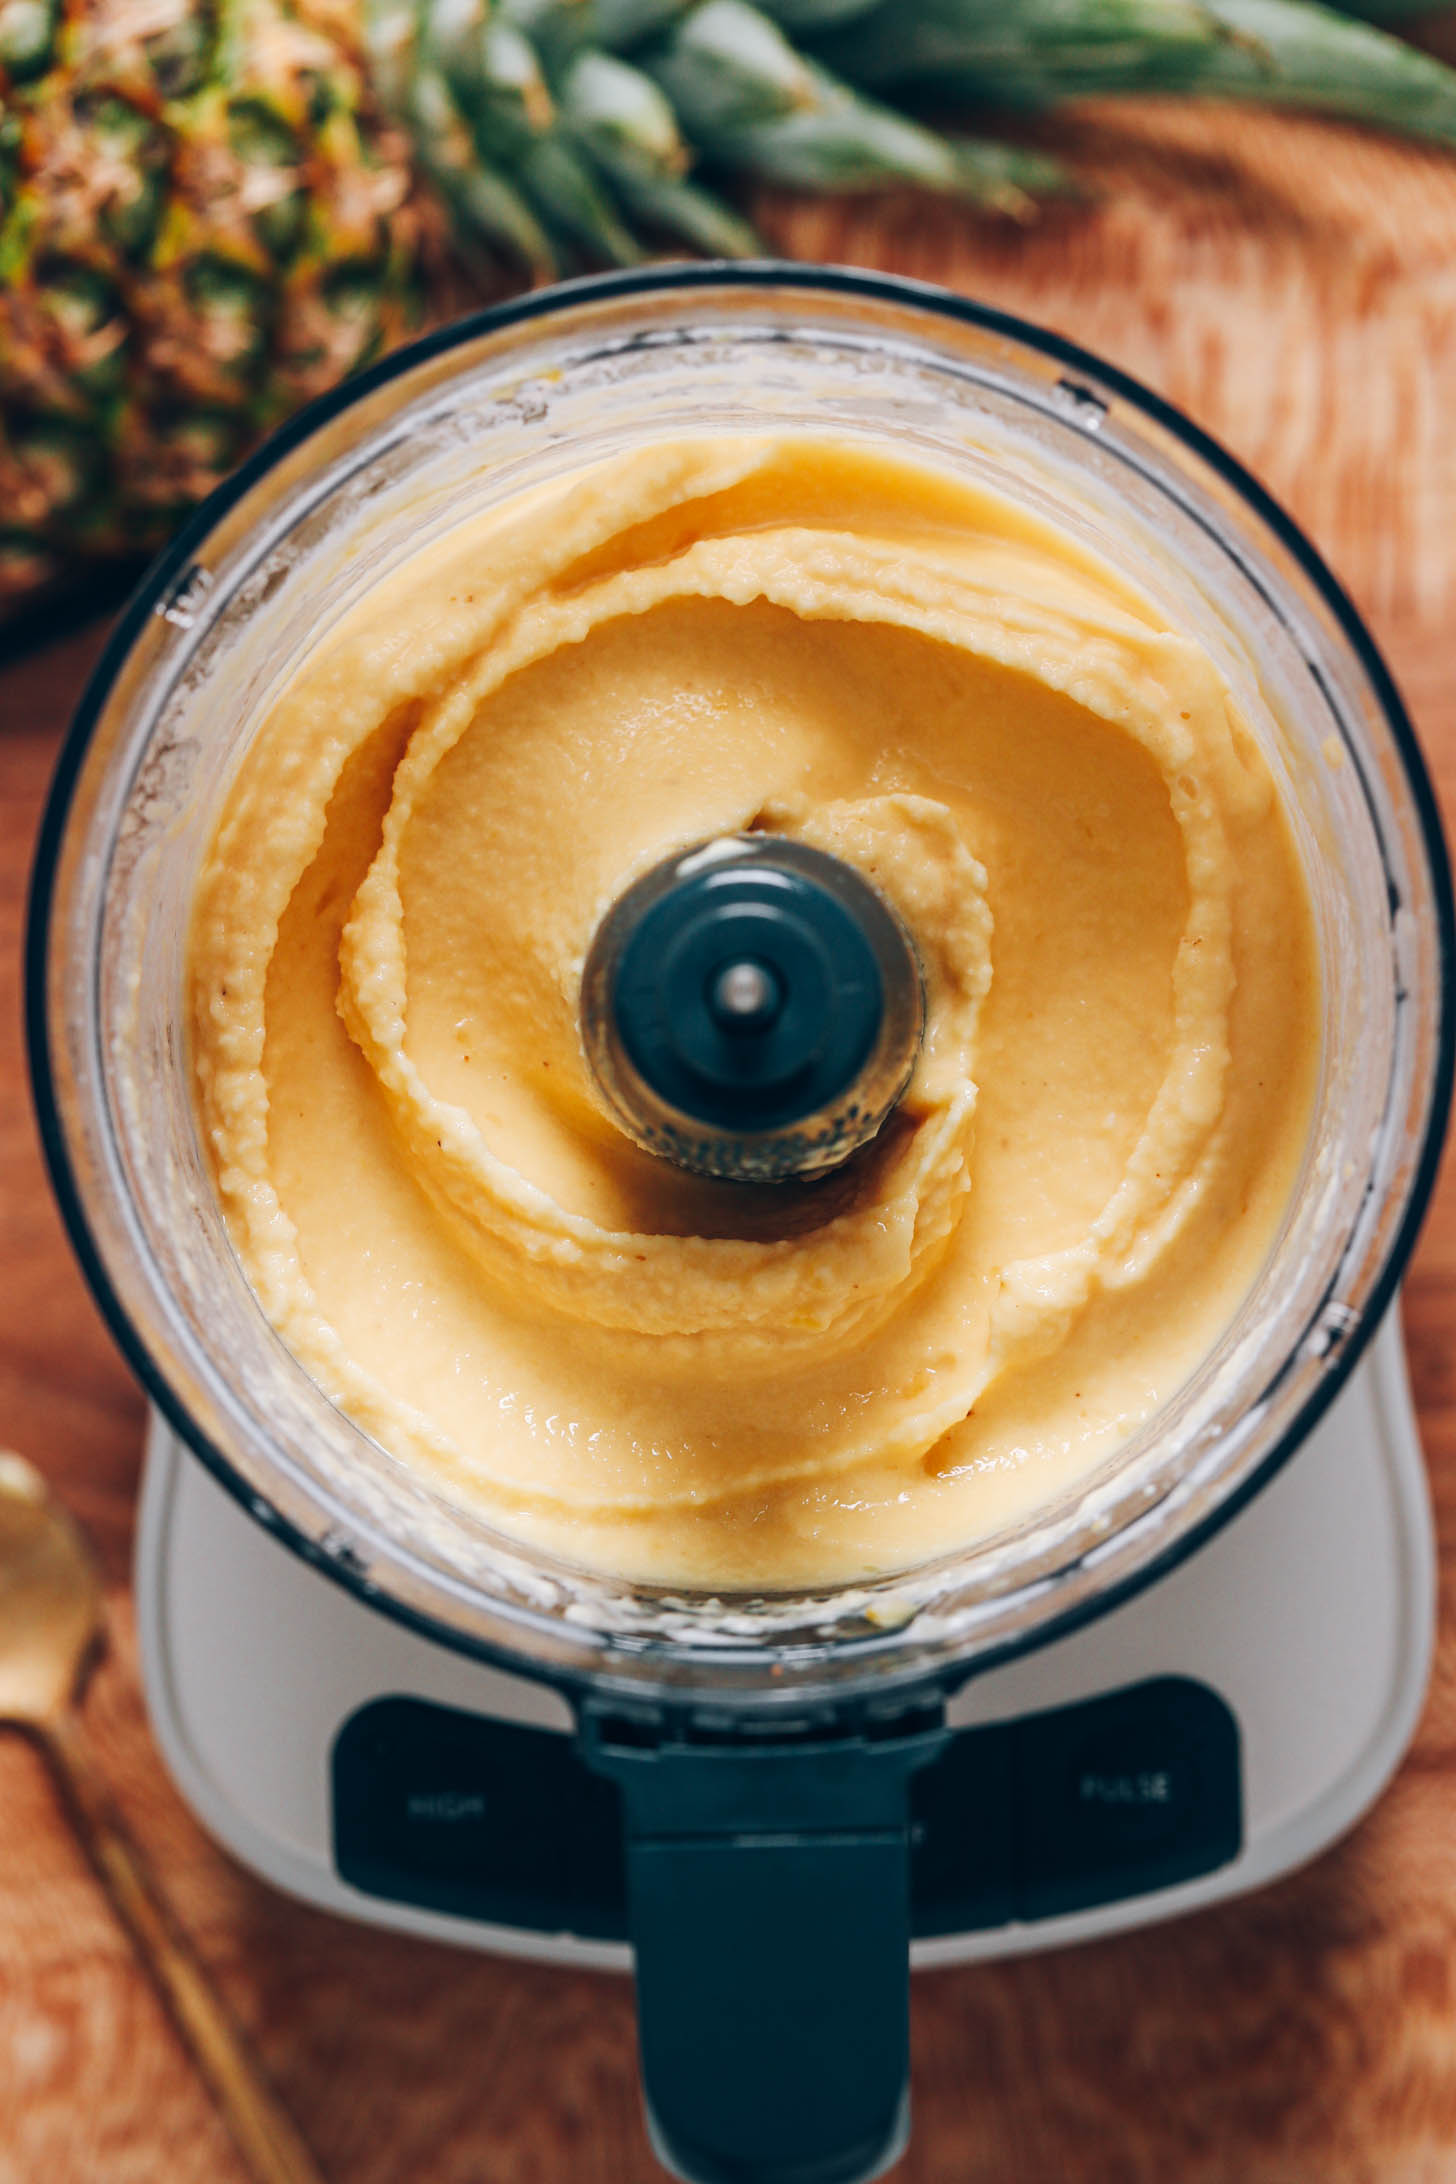 Creamy dole whip-inspired pineapple sorbet in a food processor